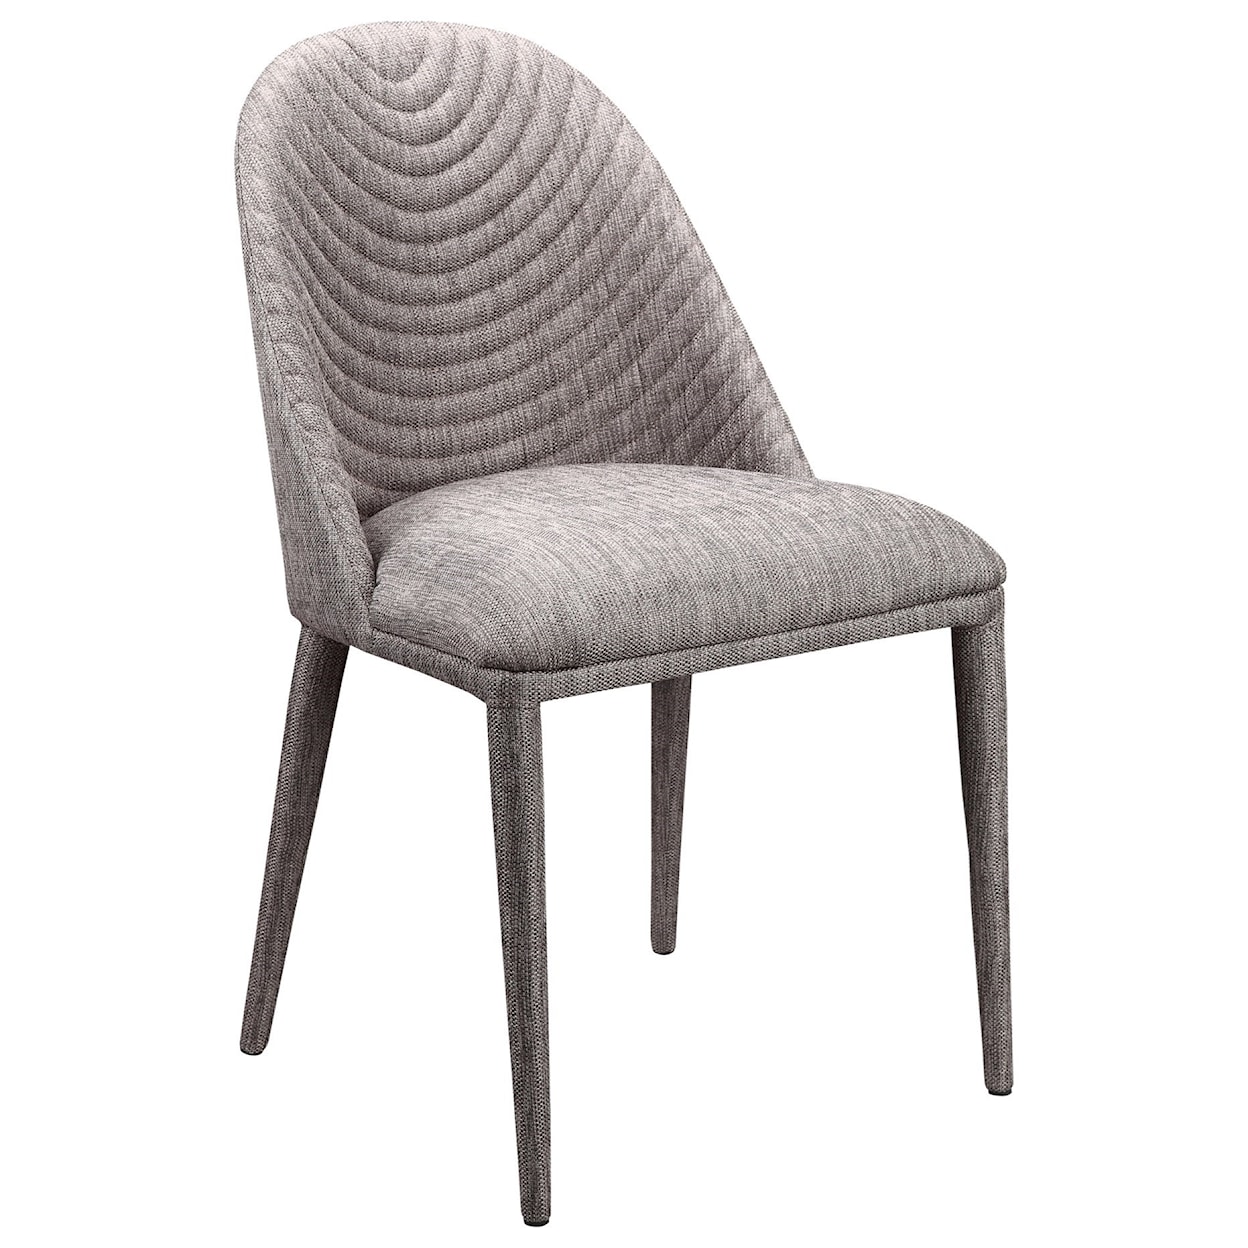 Moe's Home Collection Libby Dining Chair